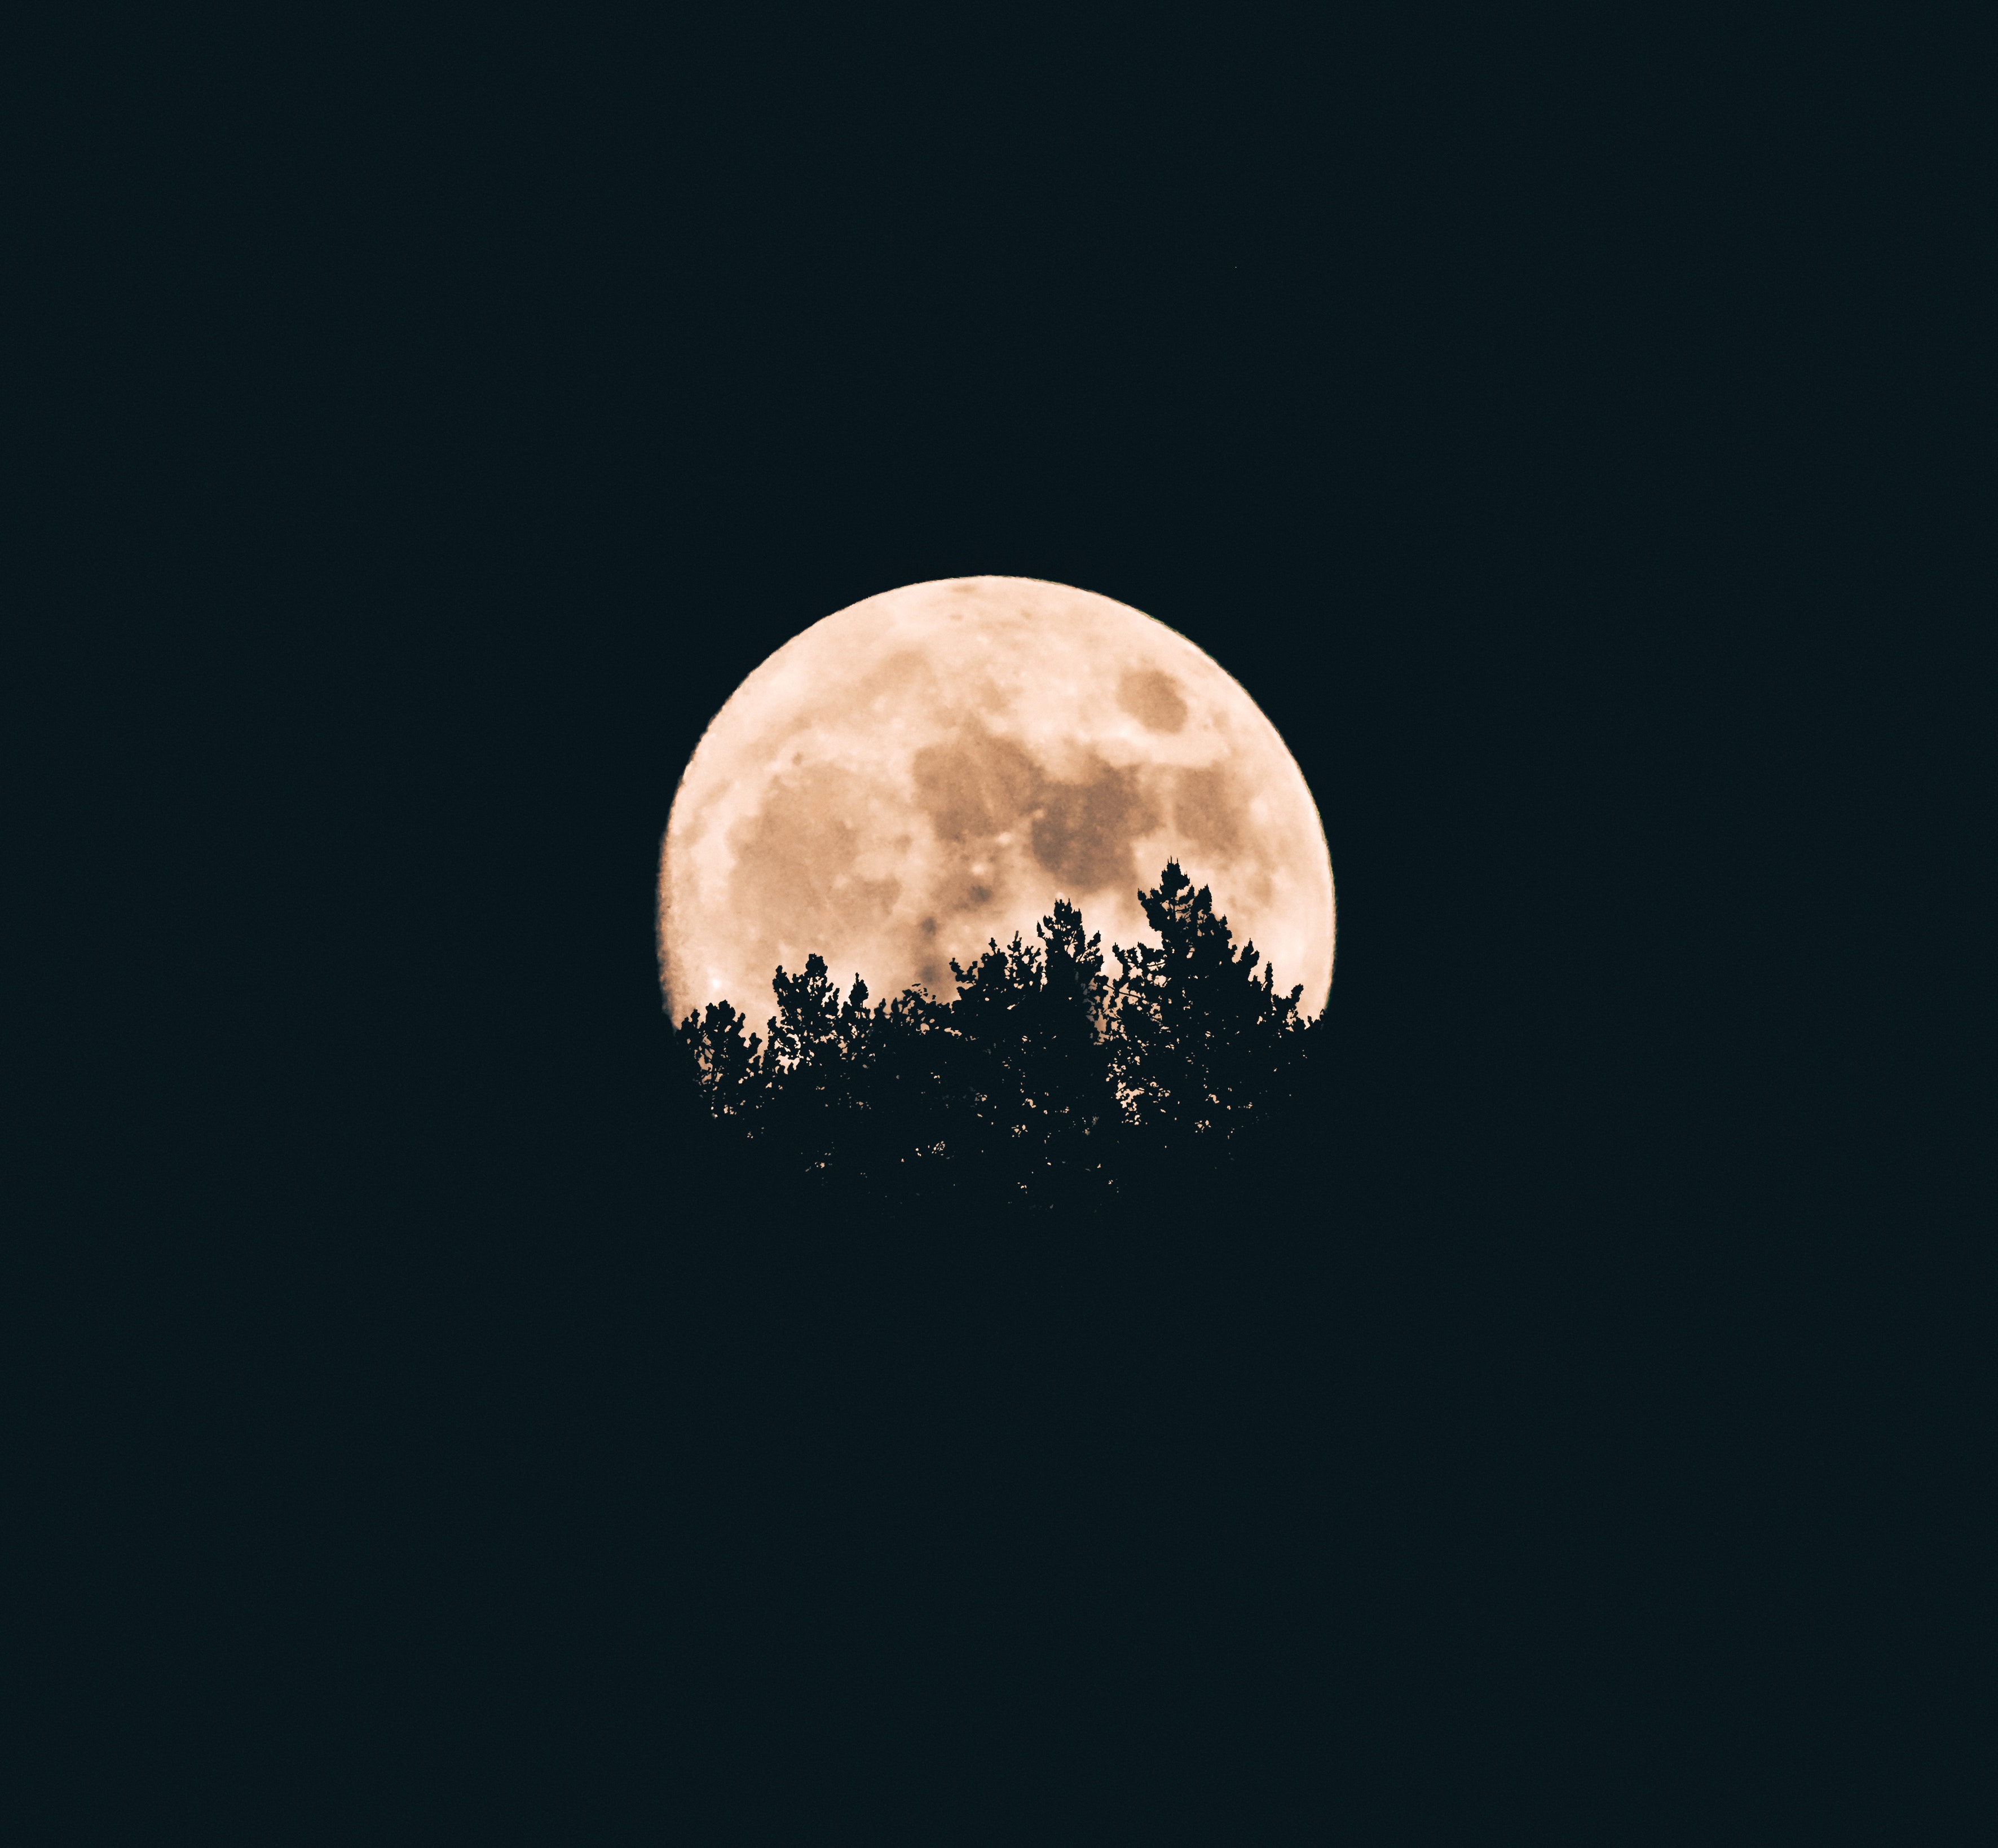 3543x3277 tree, sky, night, moon, forest, full moon, wallpaper, silhouette, nature, dark, woodland, fullmoon, Free picture Gallery HD Wallpaper